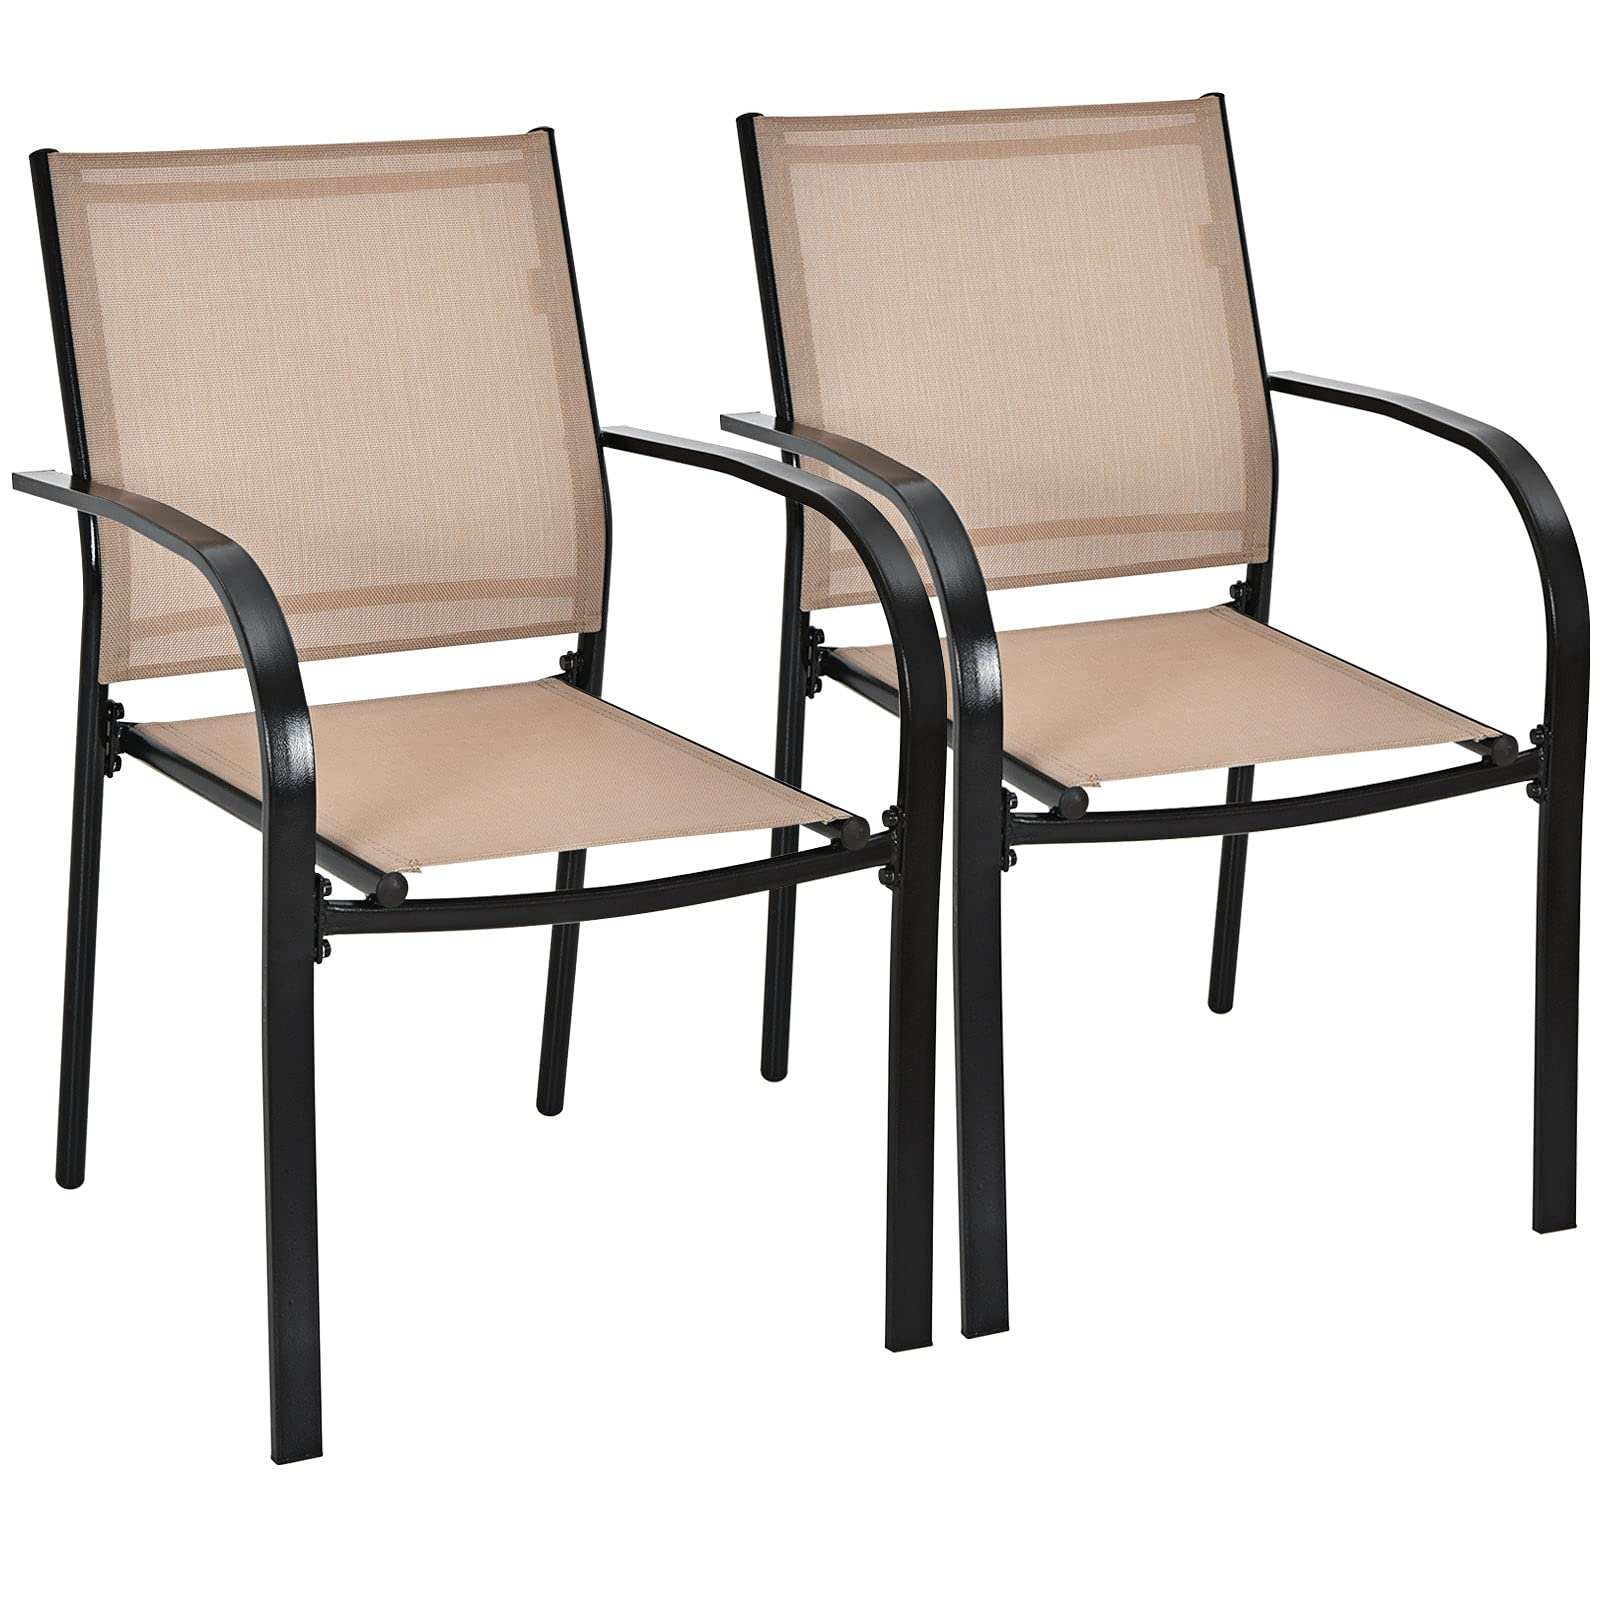 Comfortable 2 Pack Bistro Chairs for Porch Garden Backyard Poolside